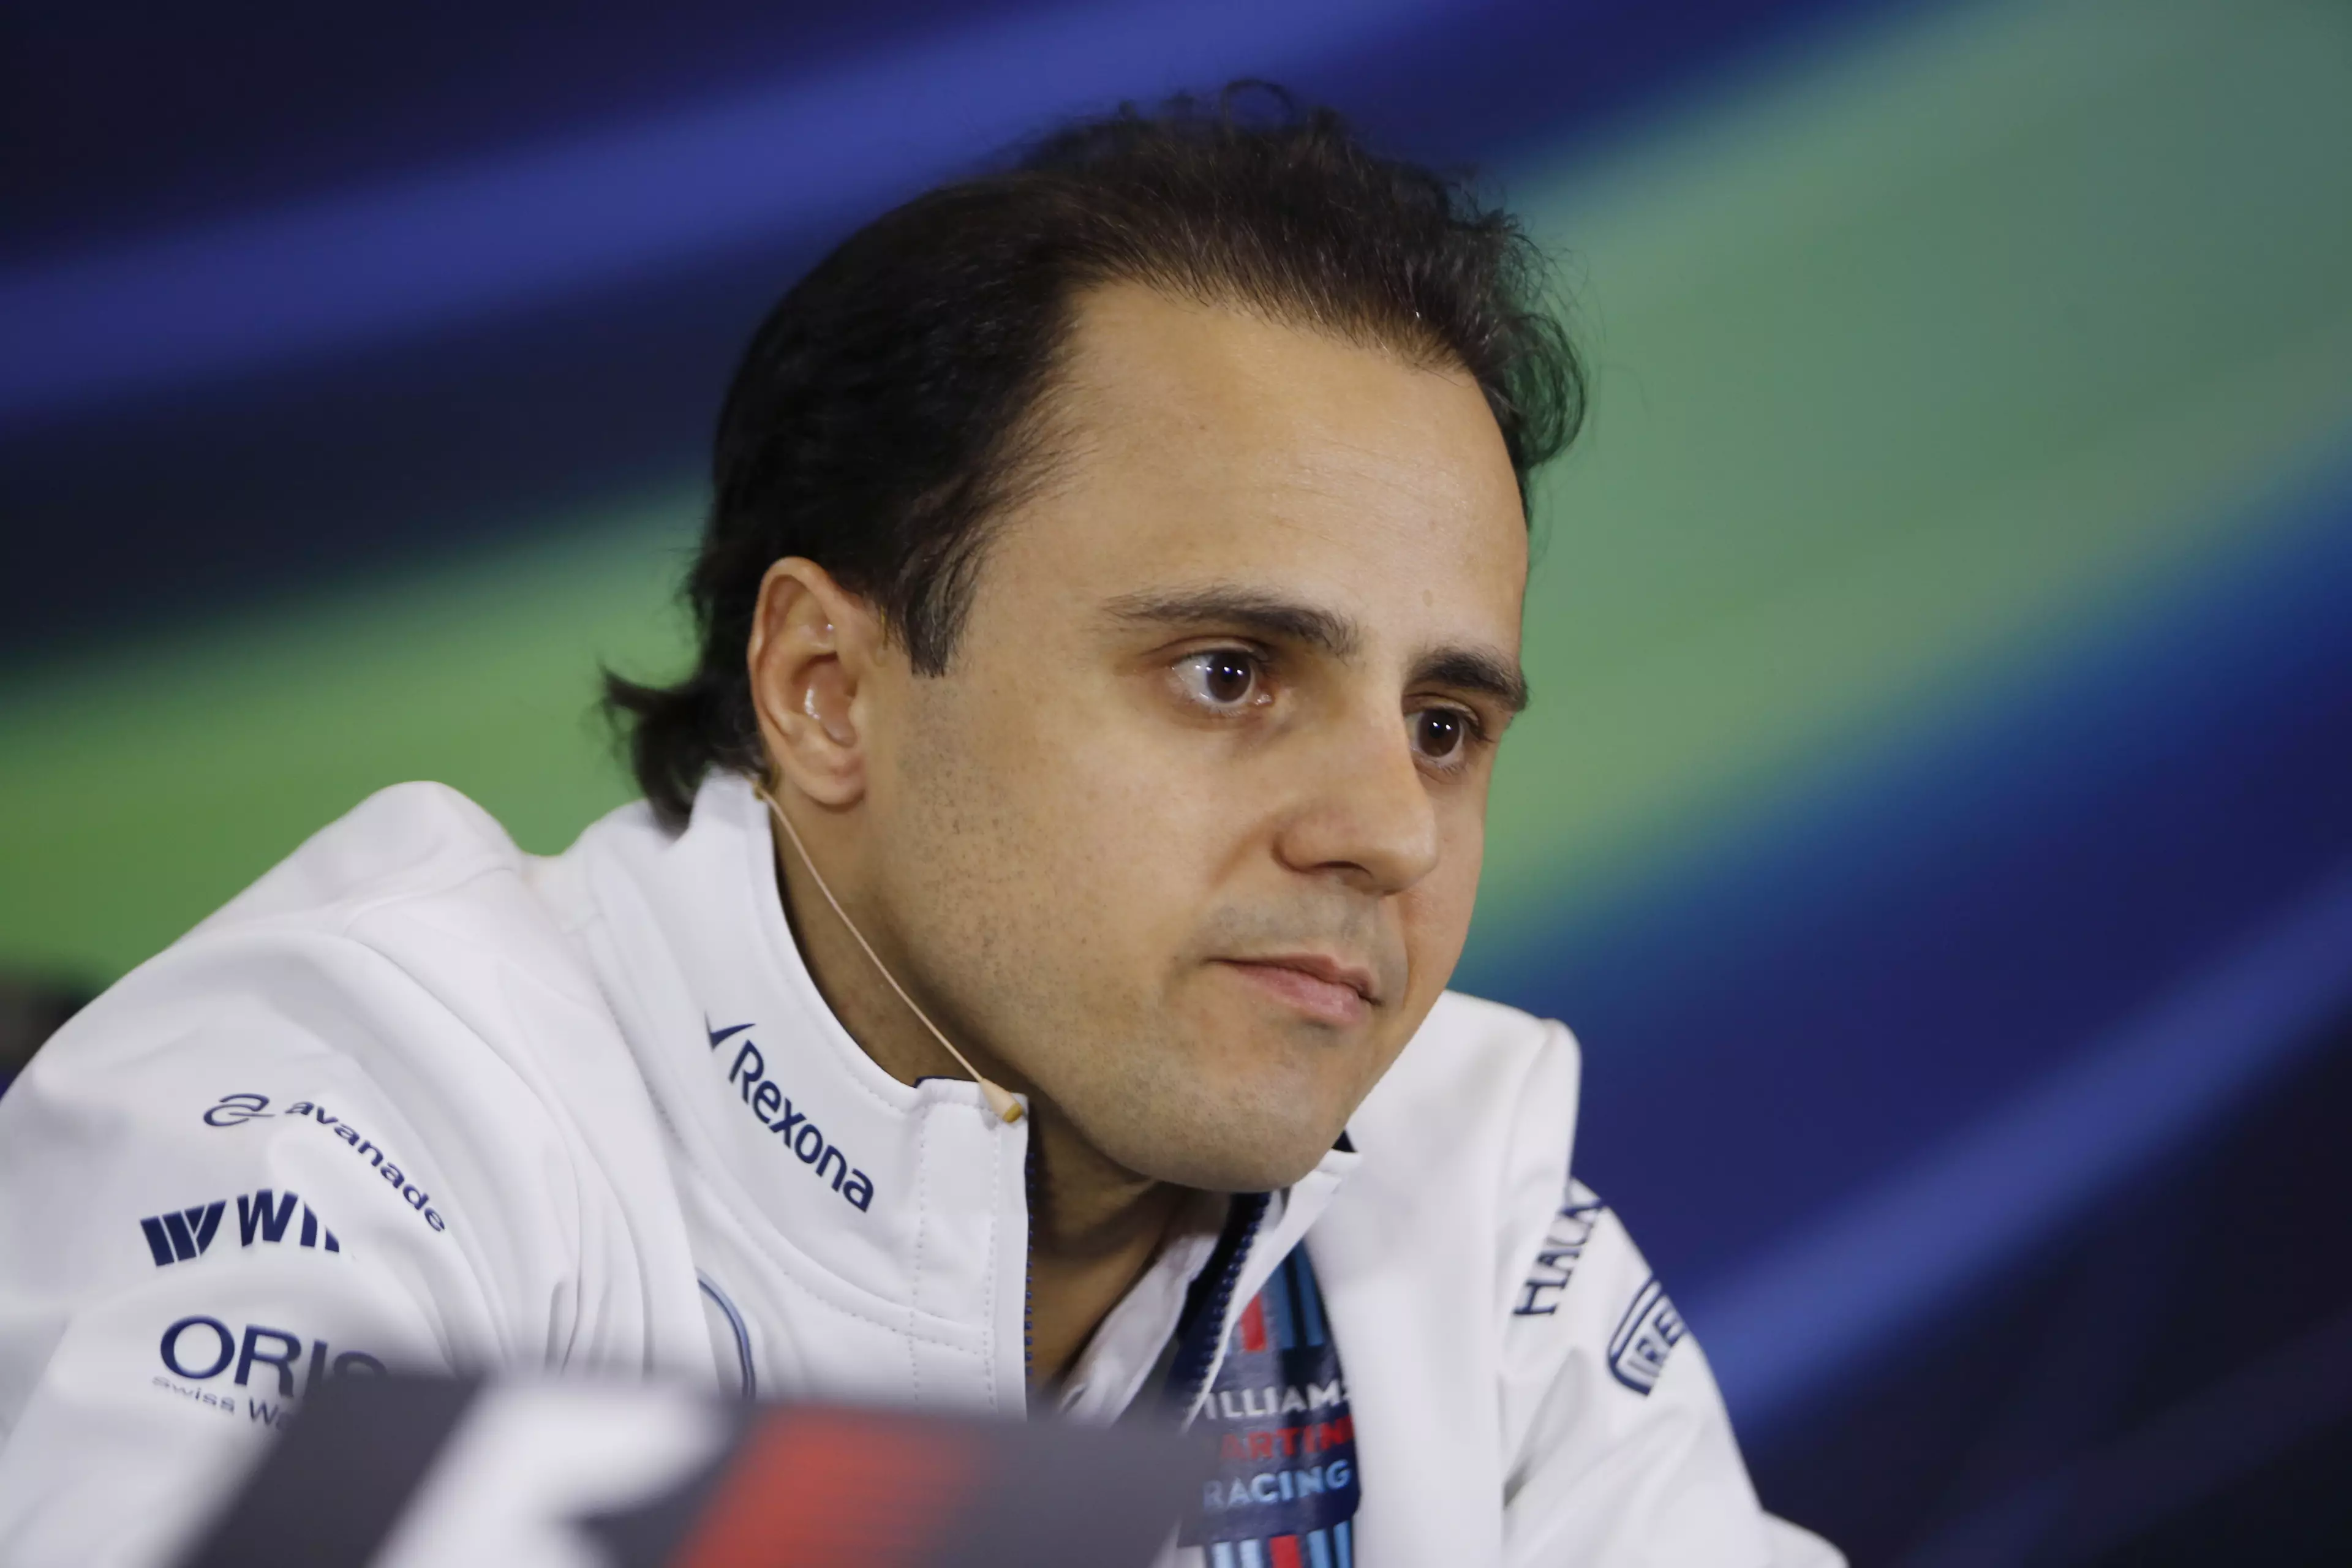 BREAKING: Felipe Massa To Retire From Formula 1 At The End Of The Season